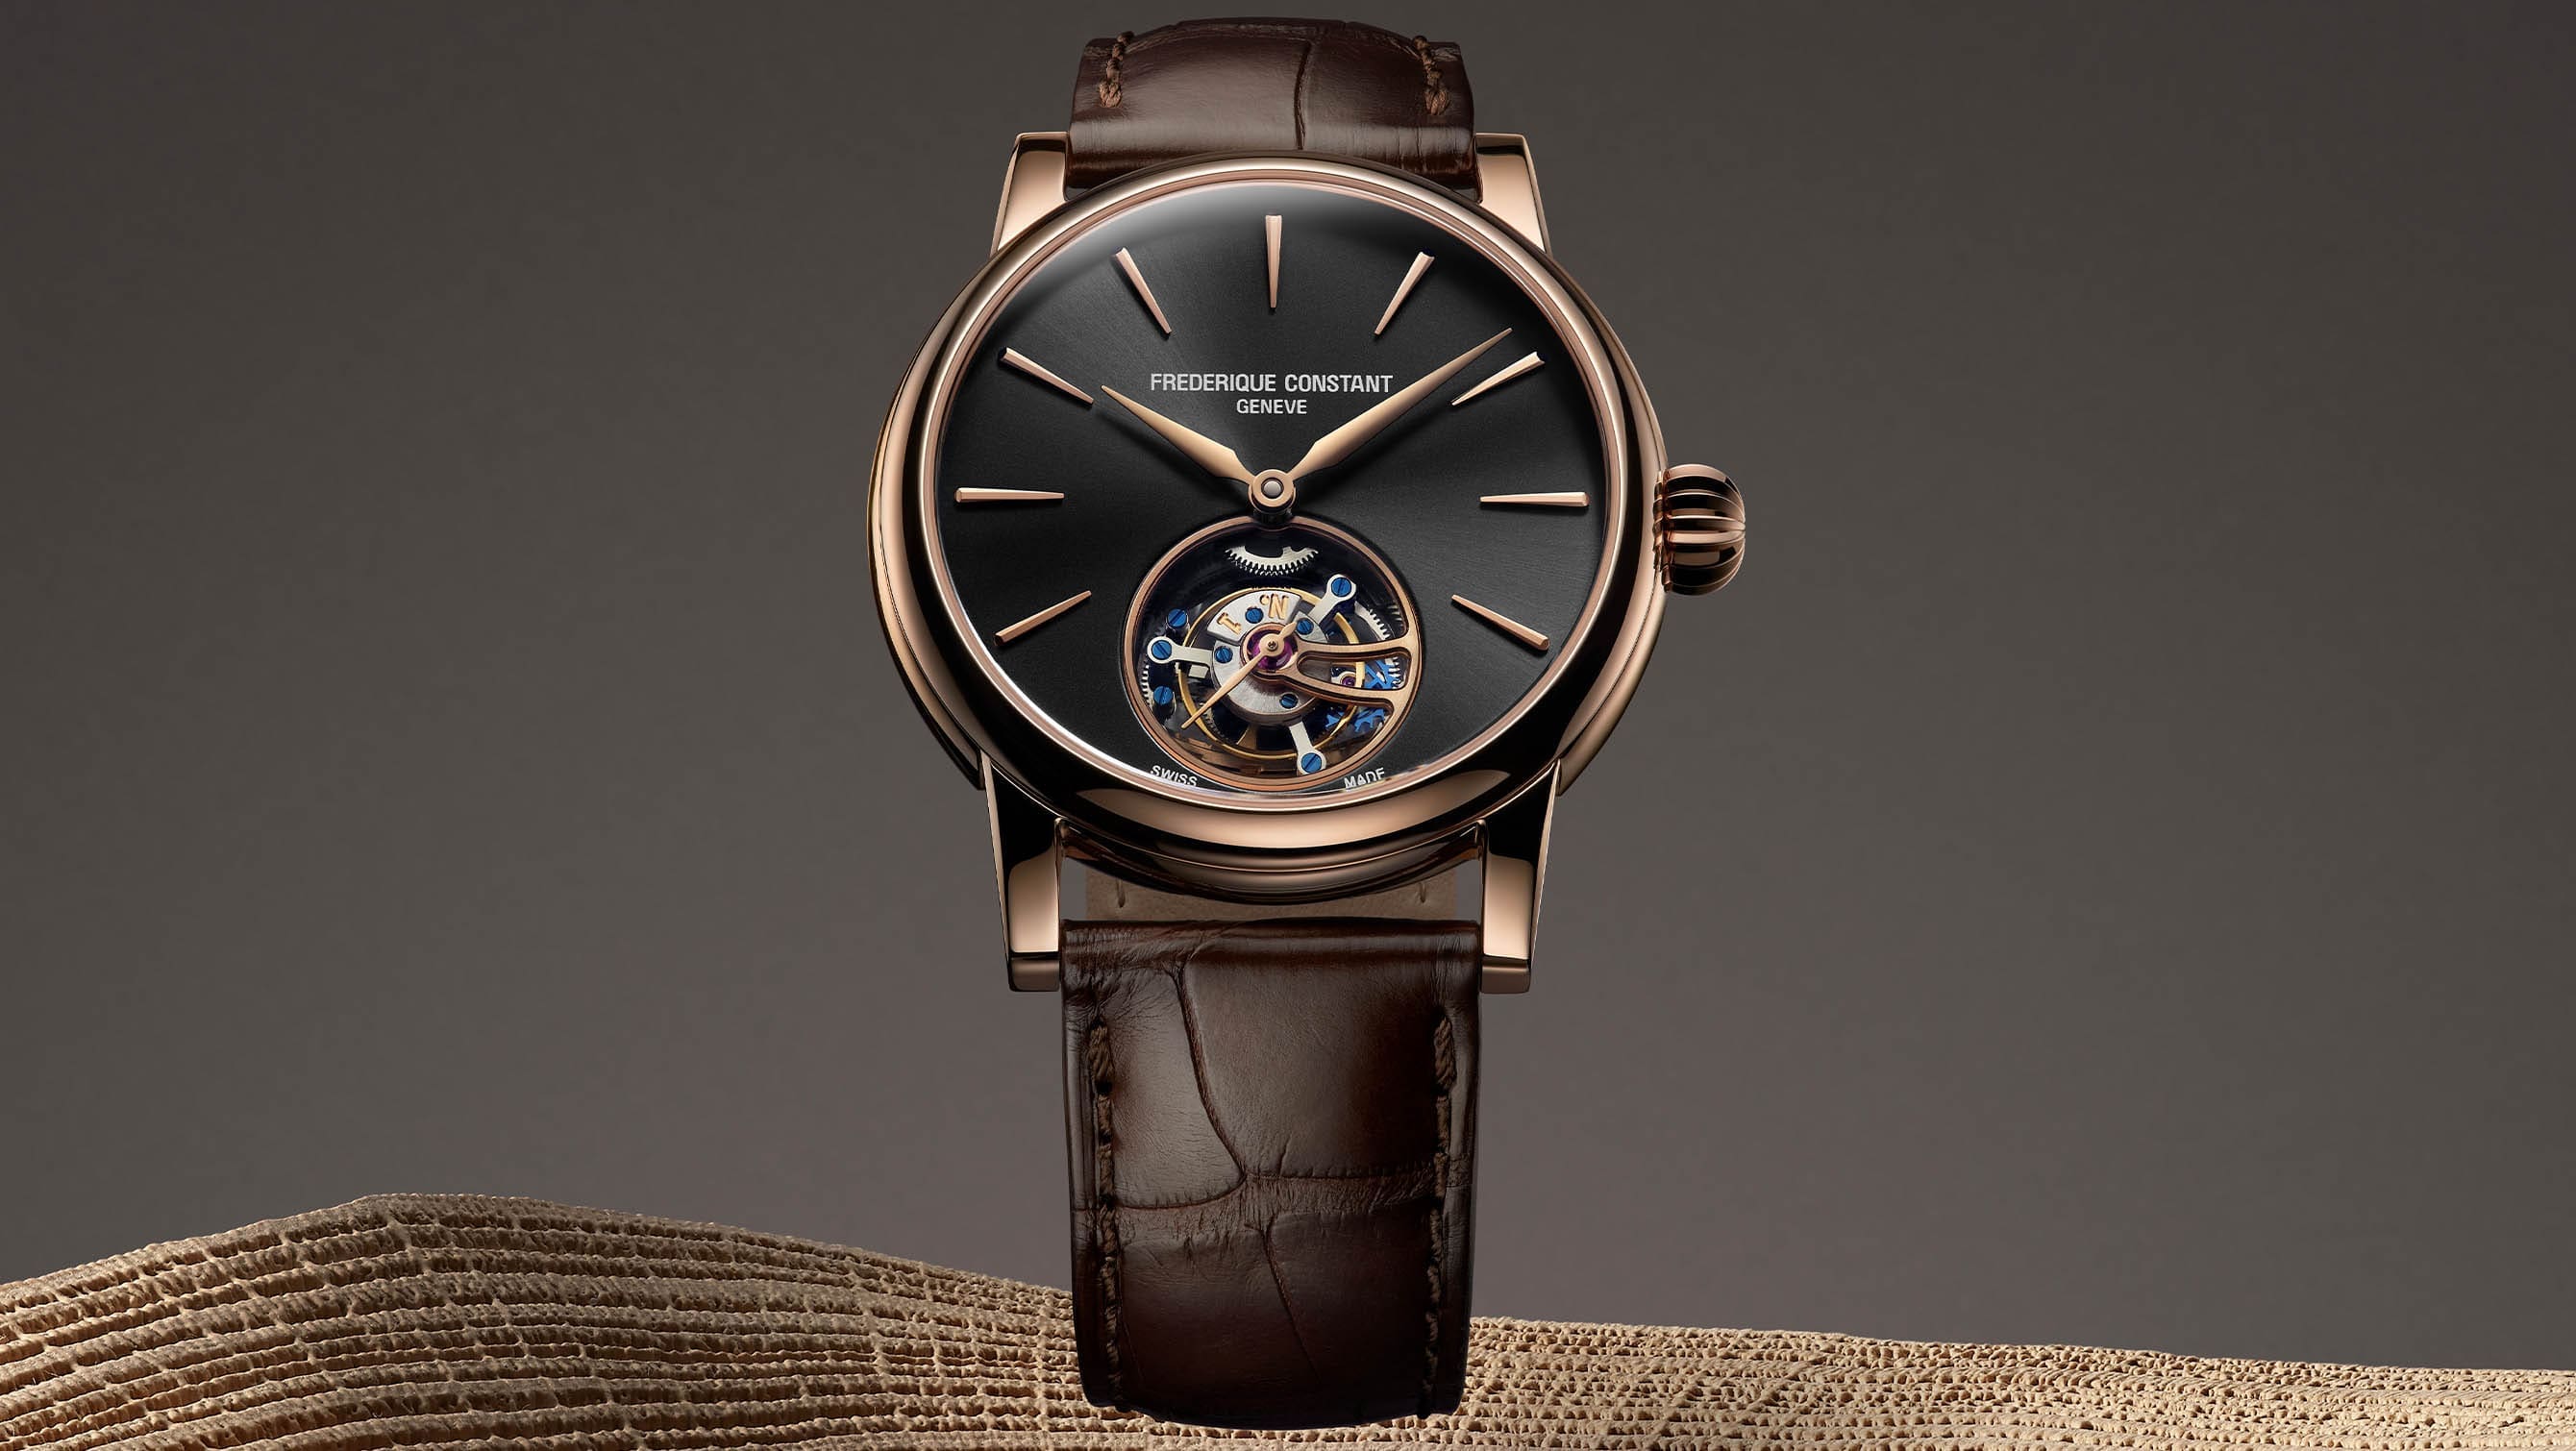 The Frederique Constant Classics Tourbillon Manufacture is a high-end flex from an accessible brand